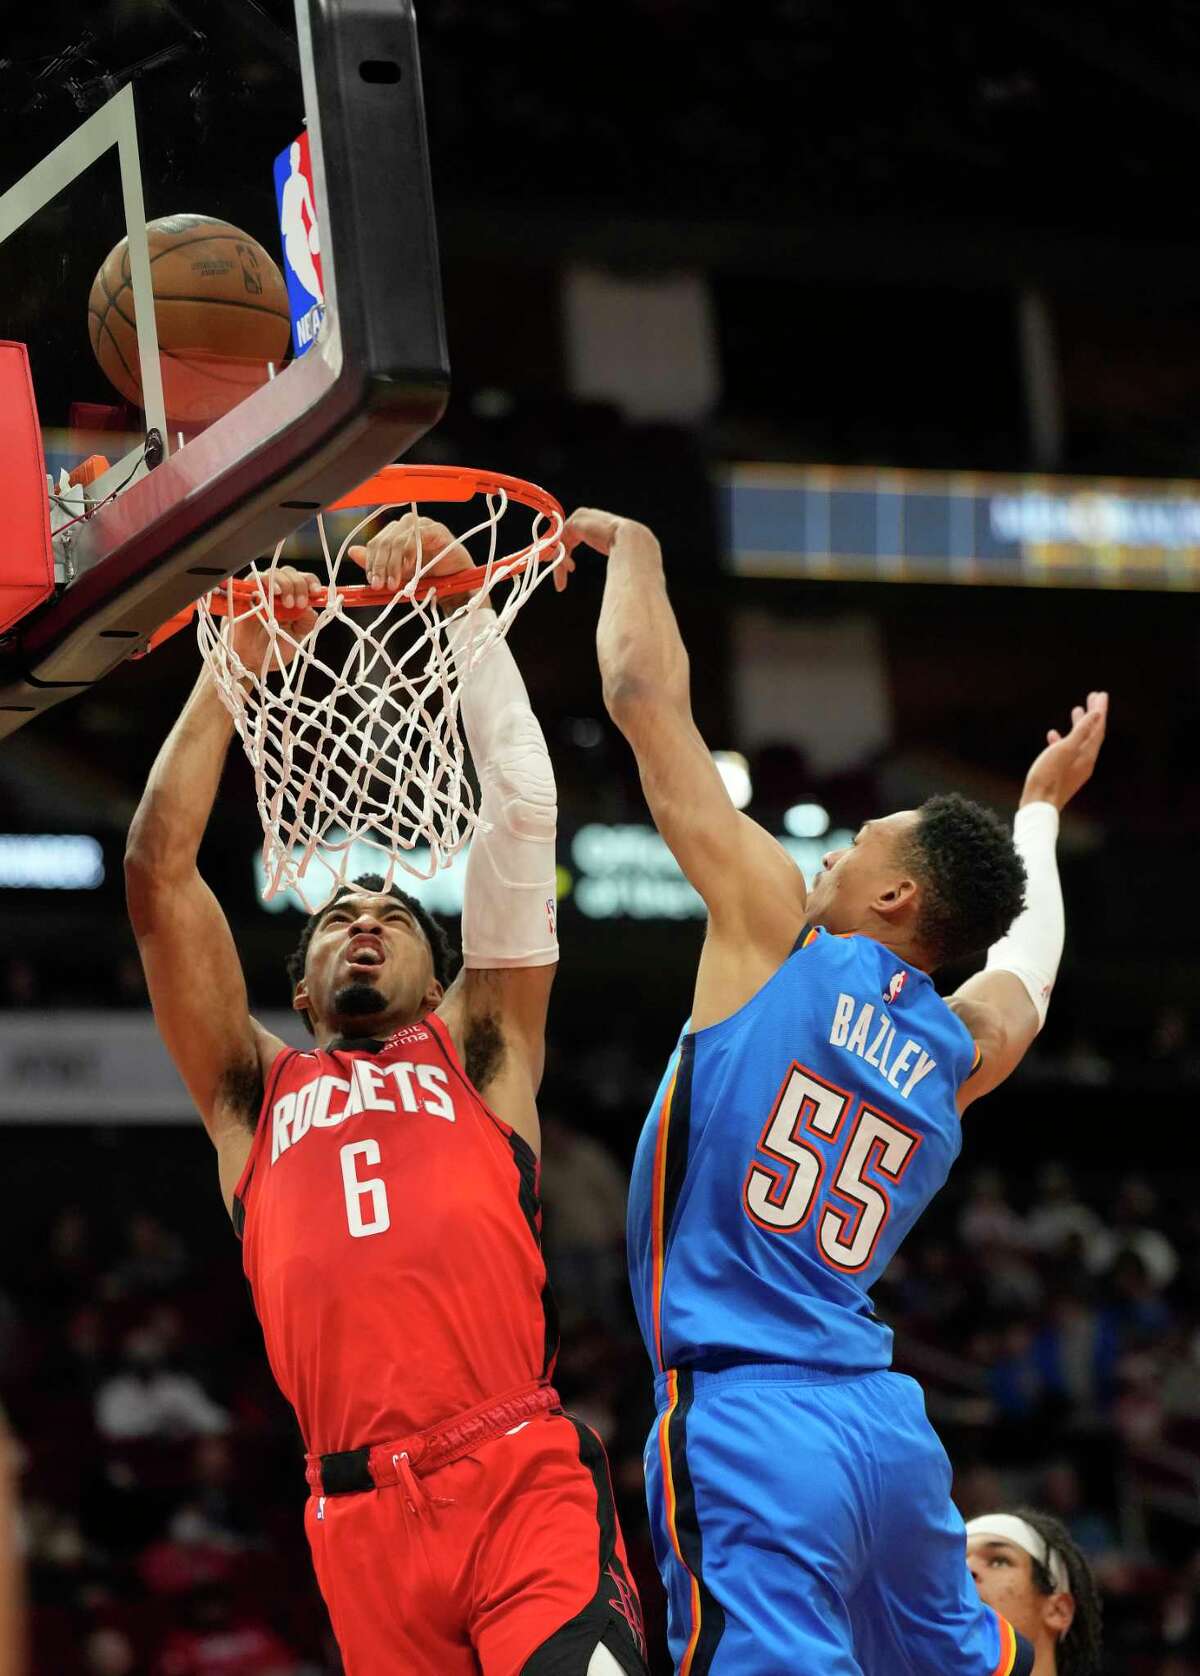 Houston Rockets forward Kenyon Martin Jr. (6) is fouled going to the basket by Oklahoma City Thunder forward Darius Bazley (55) during the first half of a NBA basketball game at Toyota Center on Wednesday, Feb. 1, 2023 in Houston.